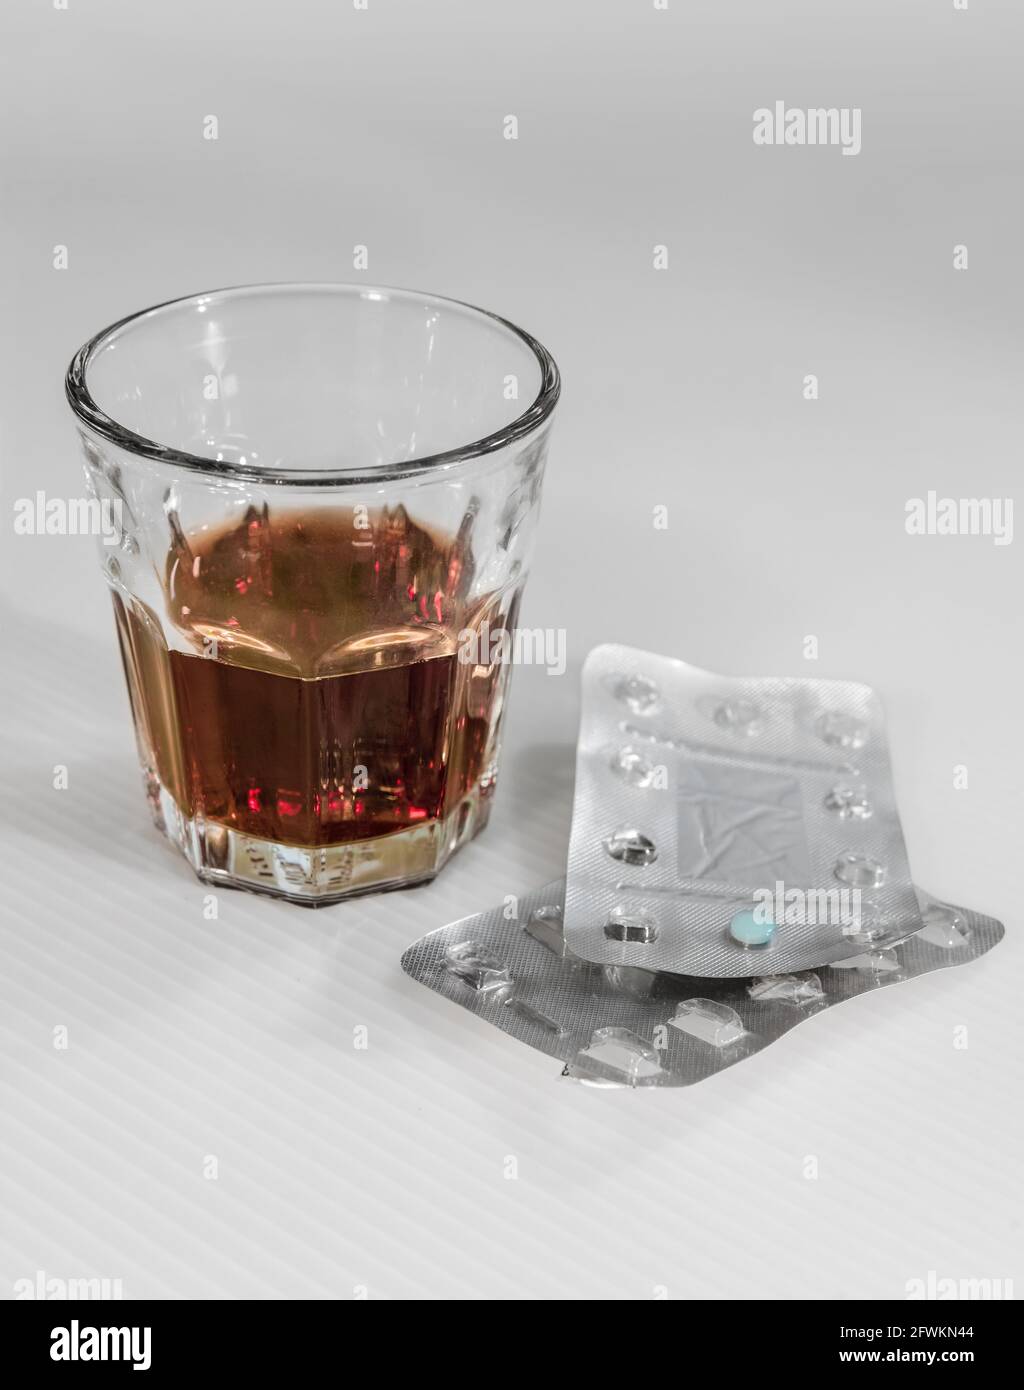 A glass of alcoholic drink and medicines. Stock Photo